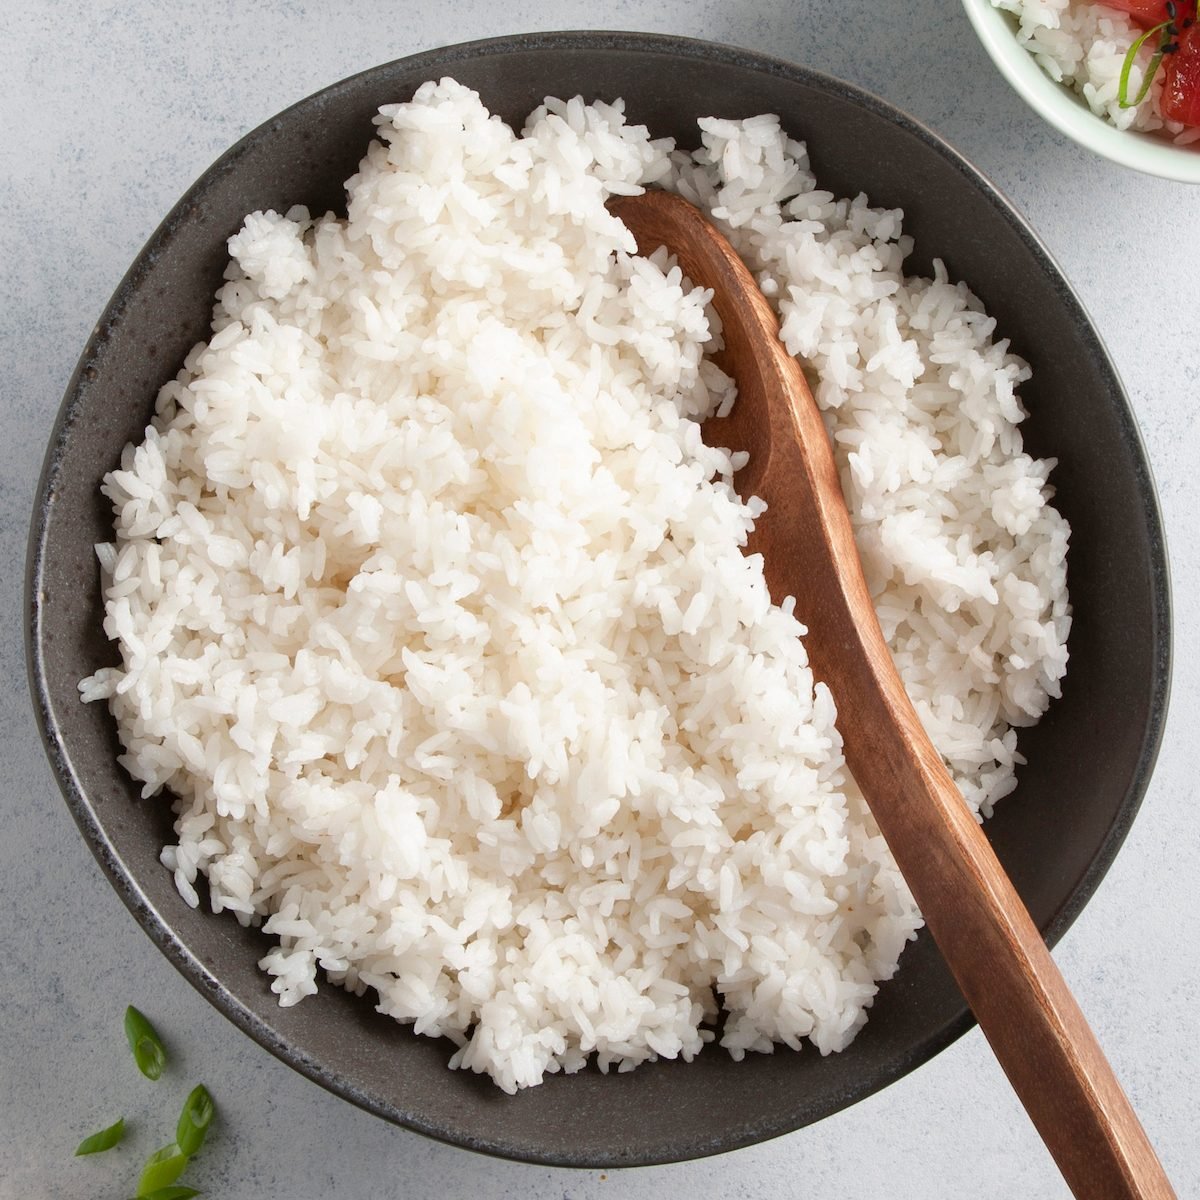 How To Store Cooked Rice In Freezer